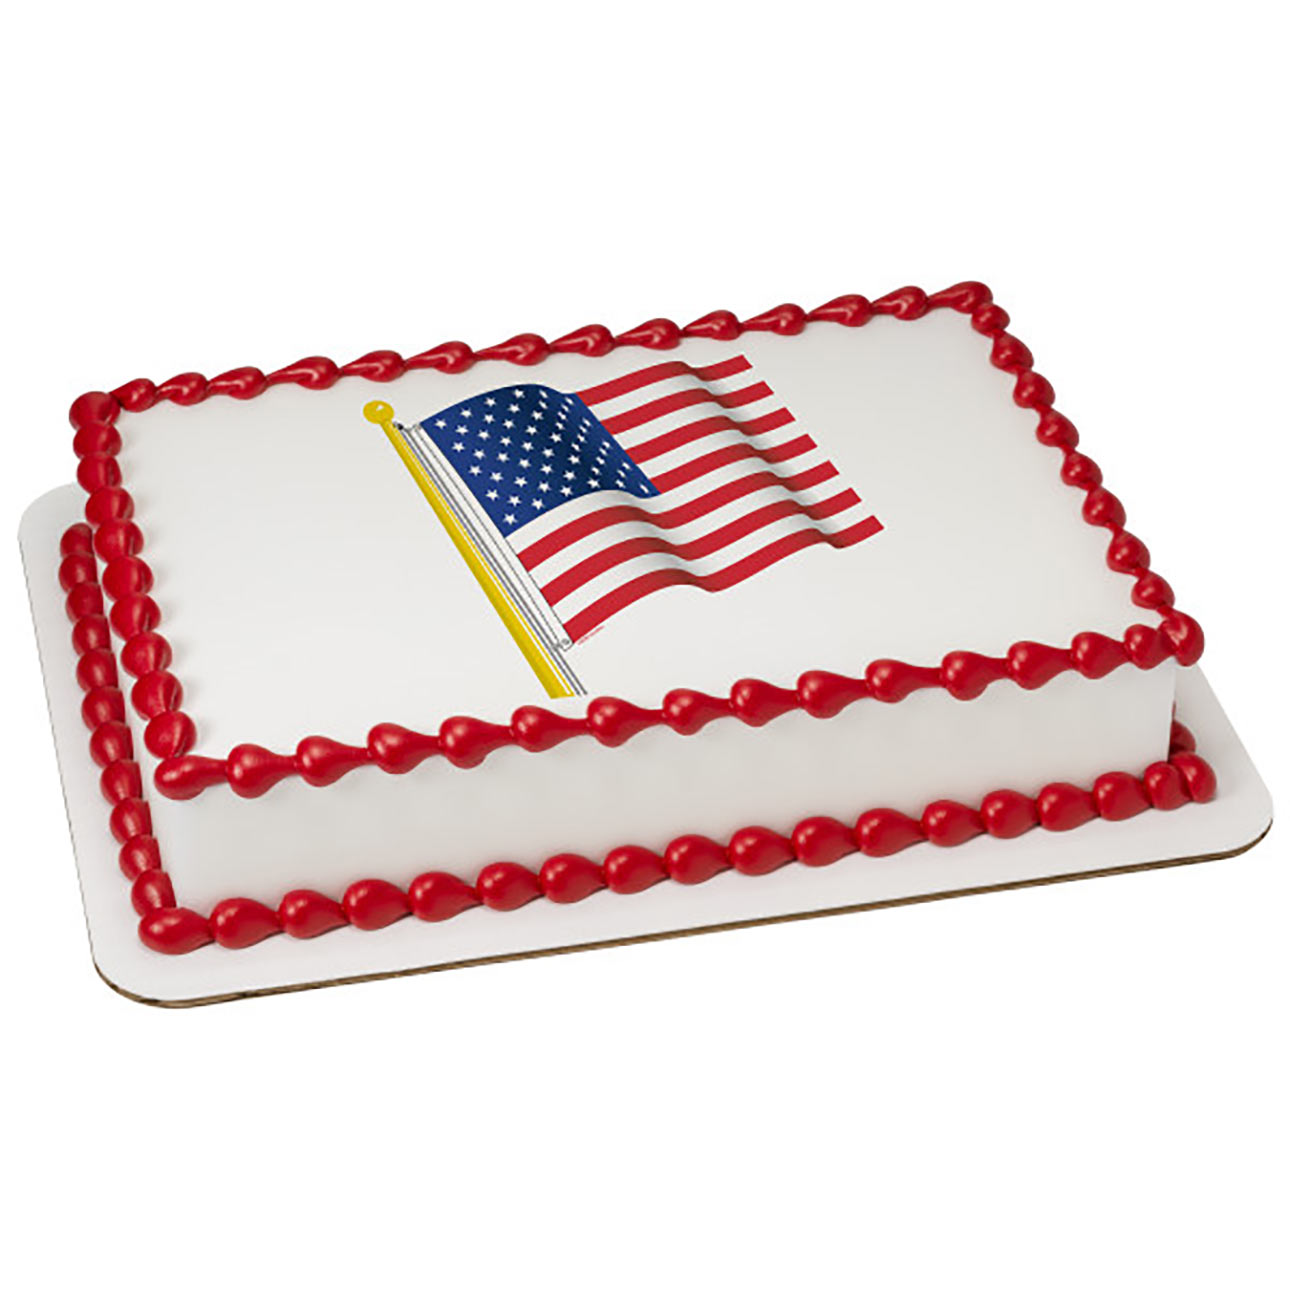 American Flag Cake | Andi's Cakes & Bakes